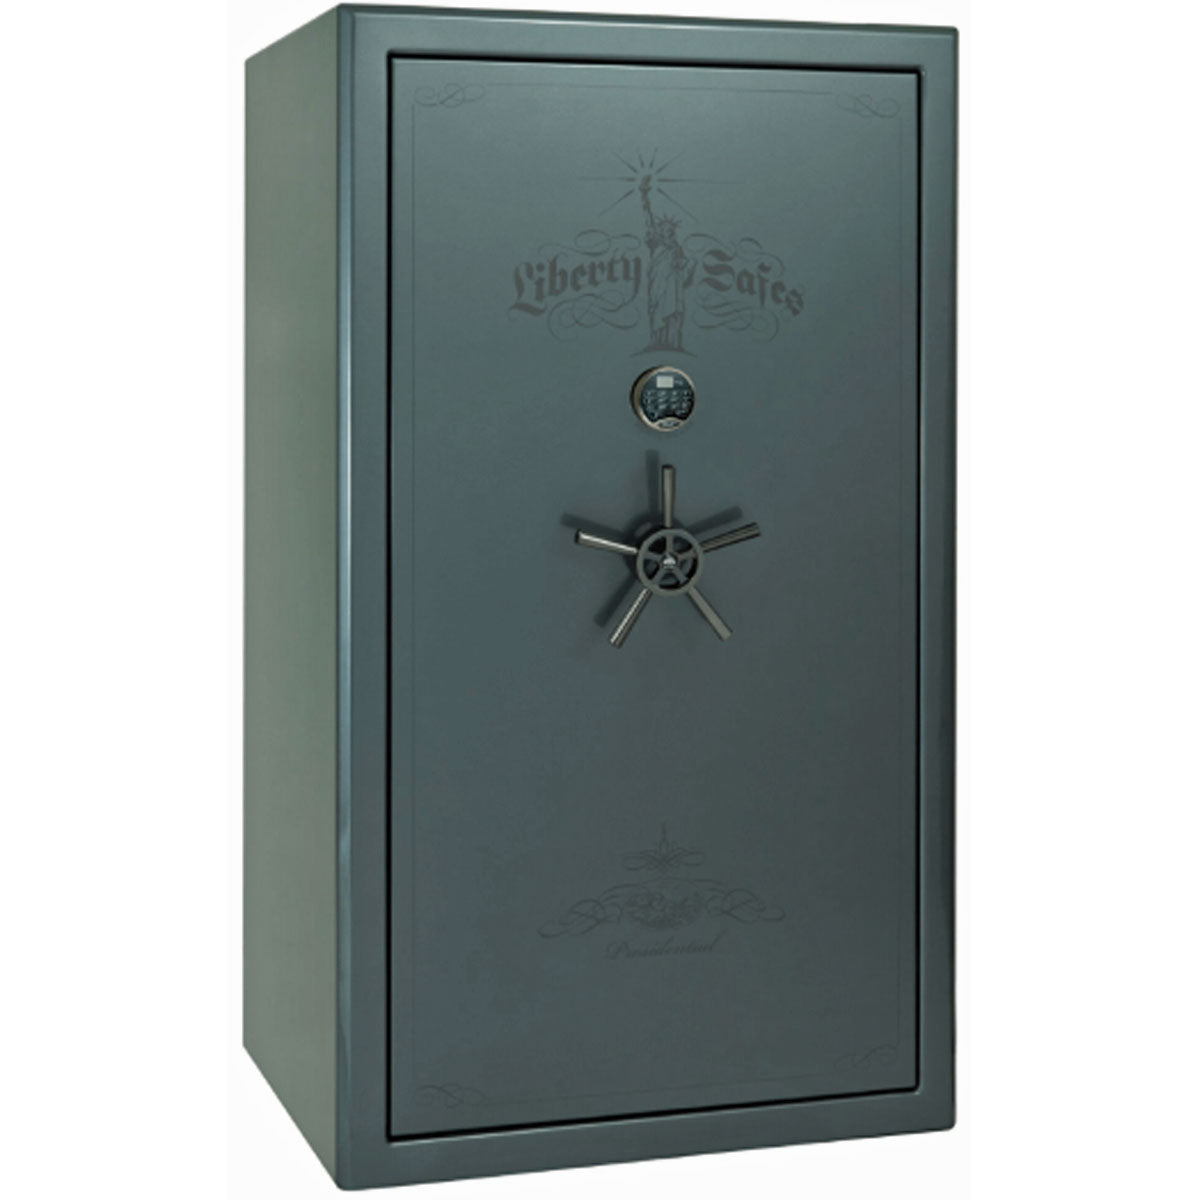 Liberty Safe Presidential 50 in Forest Mist Gloss with Black Chrome Electronic Lock, closed door.